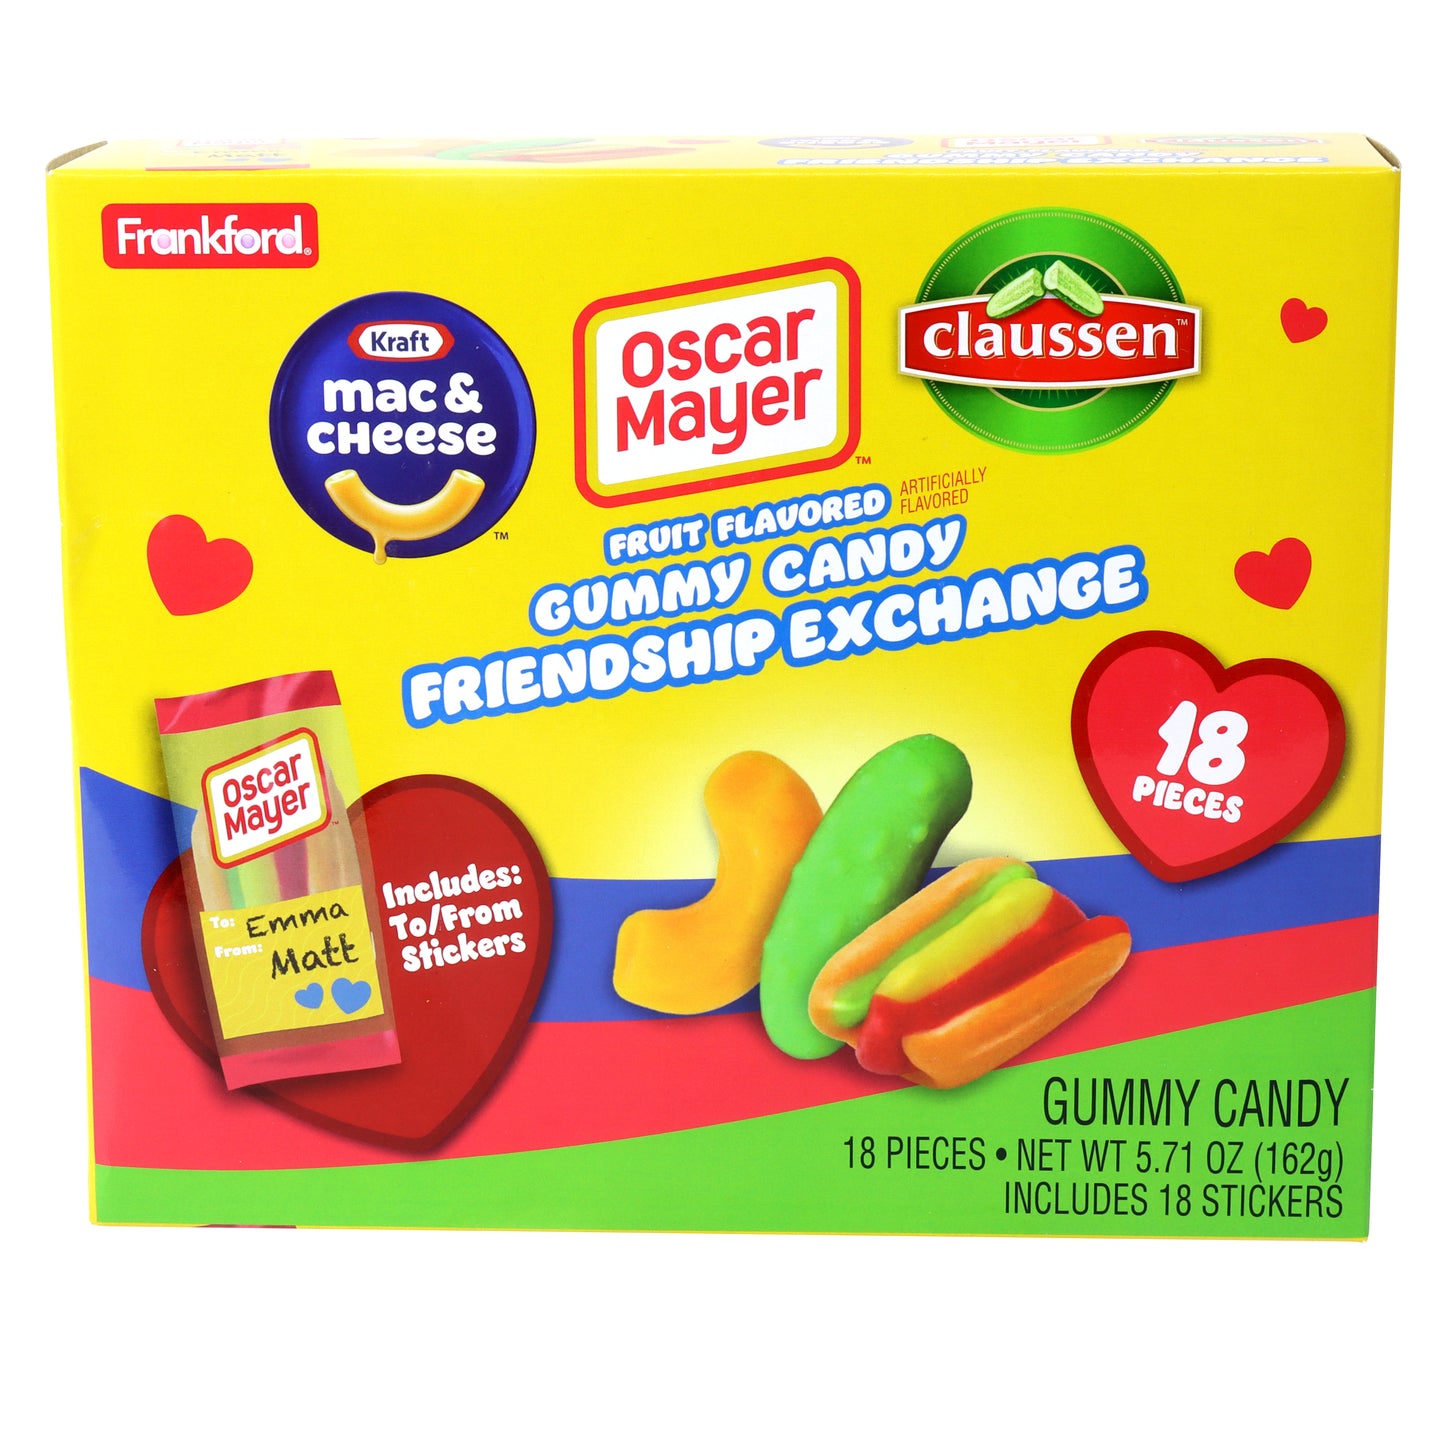 yellow box of gummy candy friendship exchange with hot dog, pickle, and mac and cheese gummies pictured